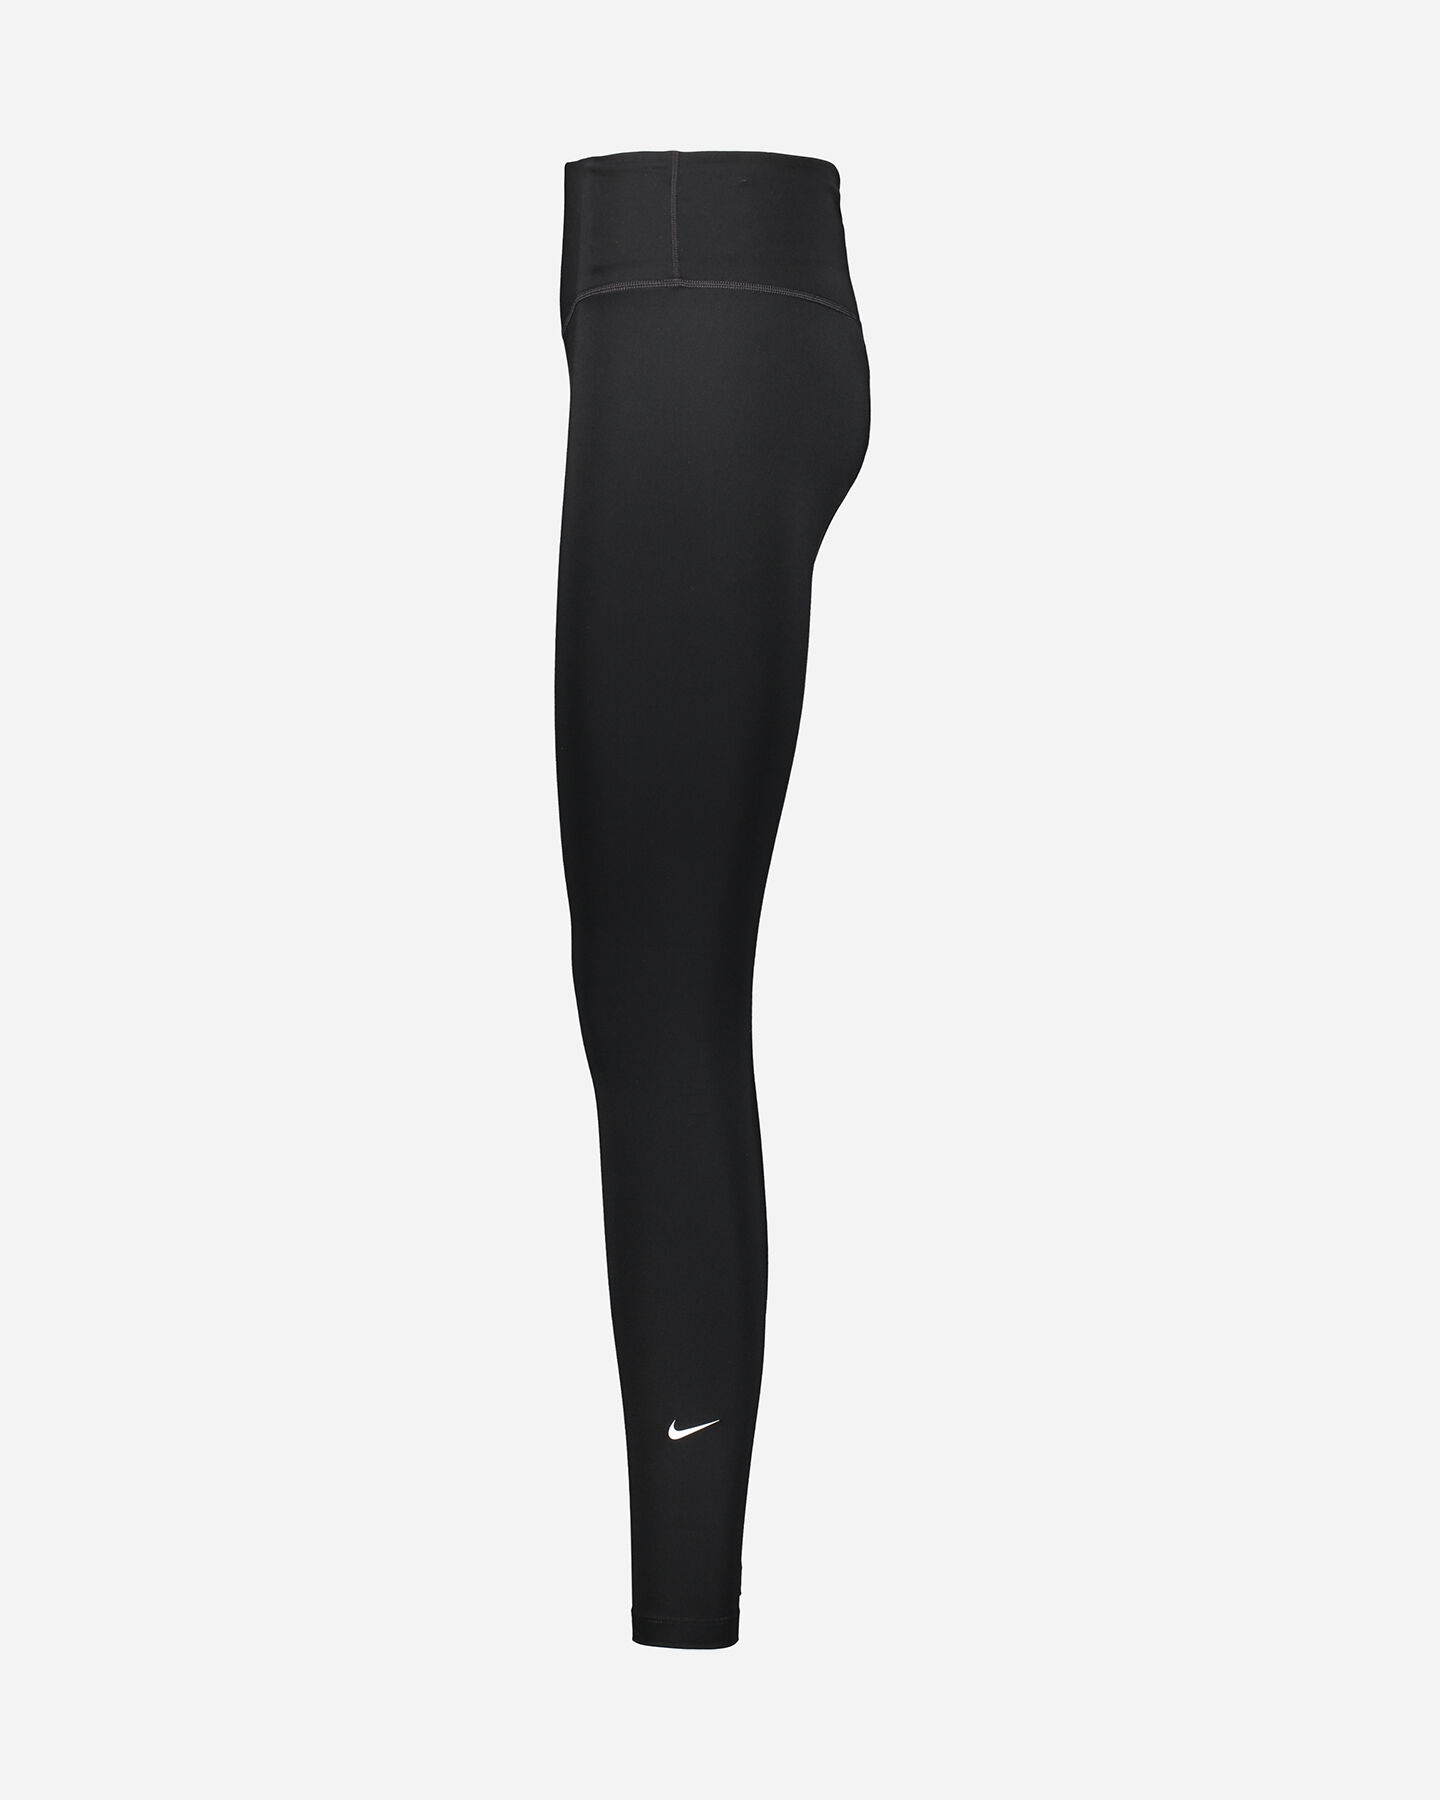  Leggings NIKE ONE HIGH RISE W S5270290|010|XS scatto 1